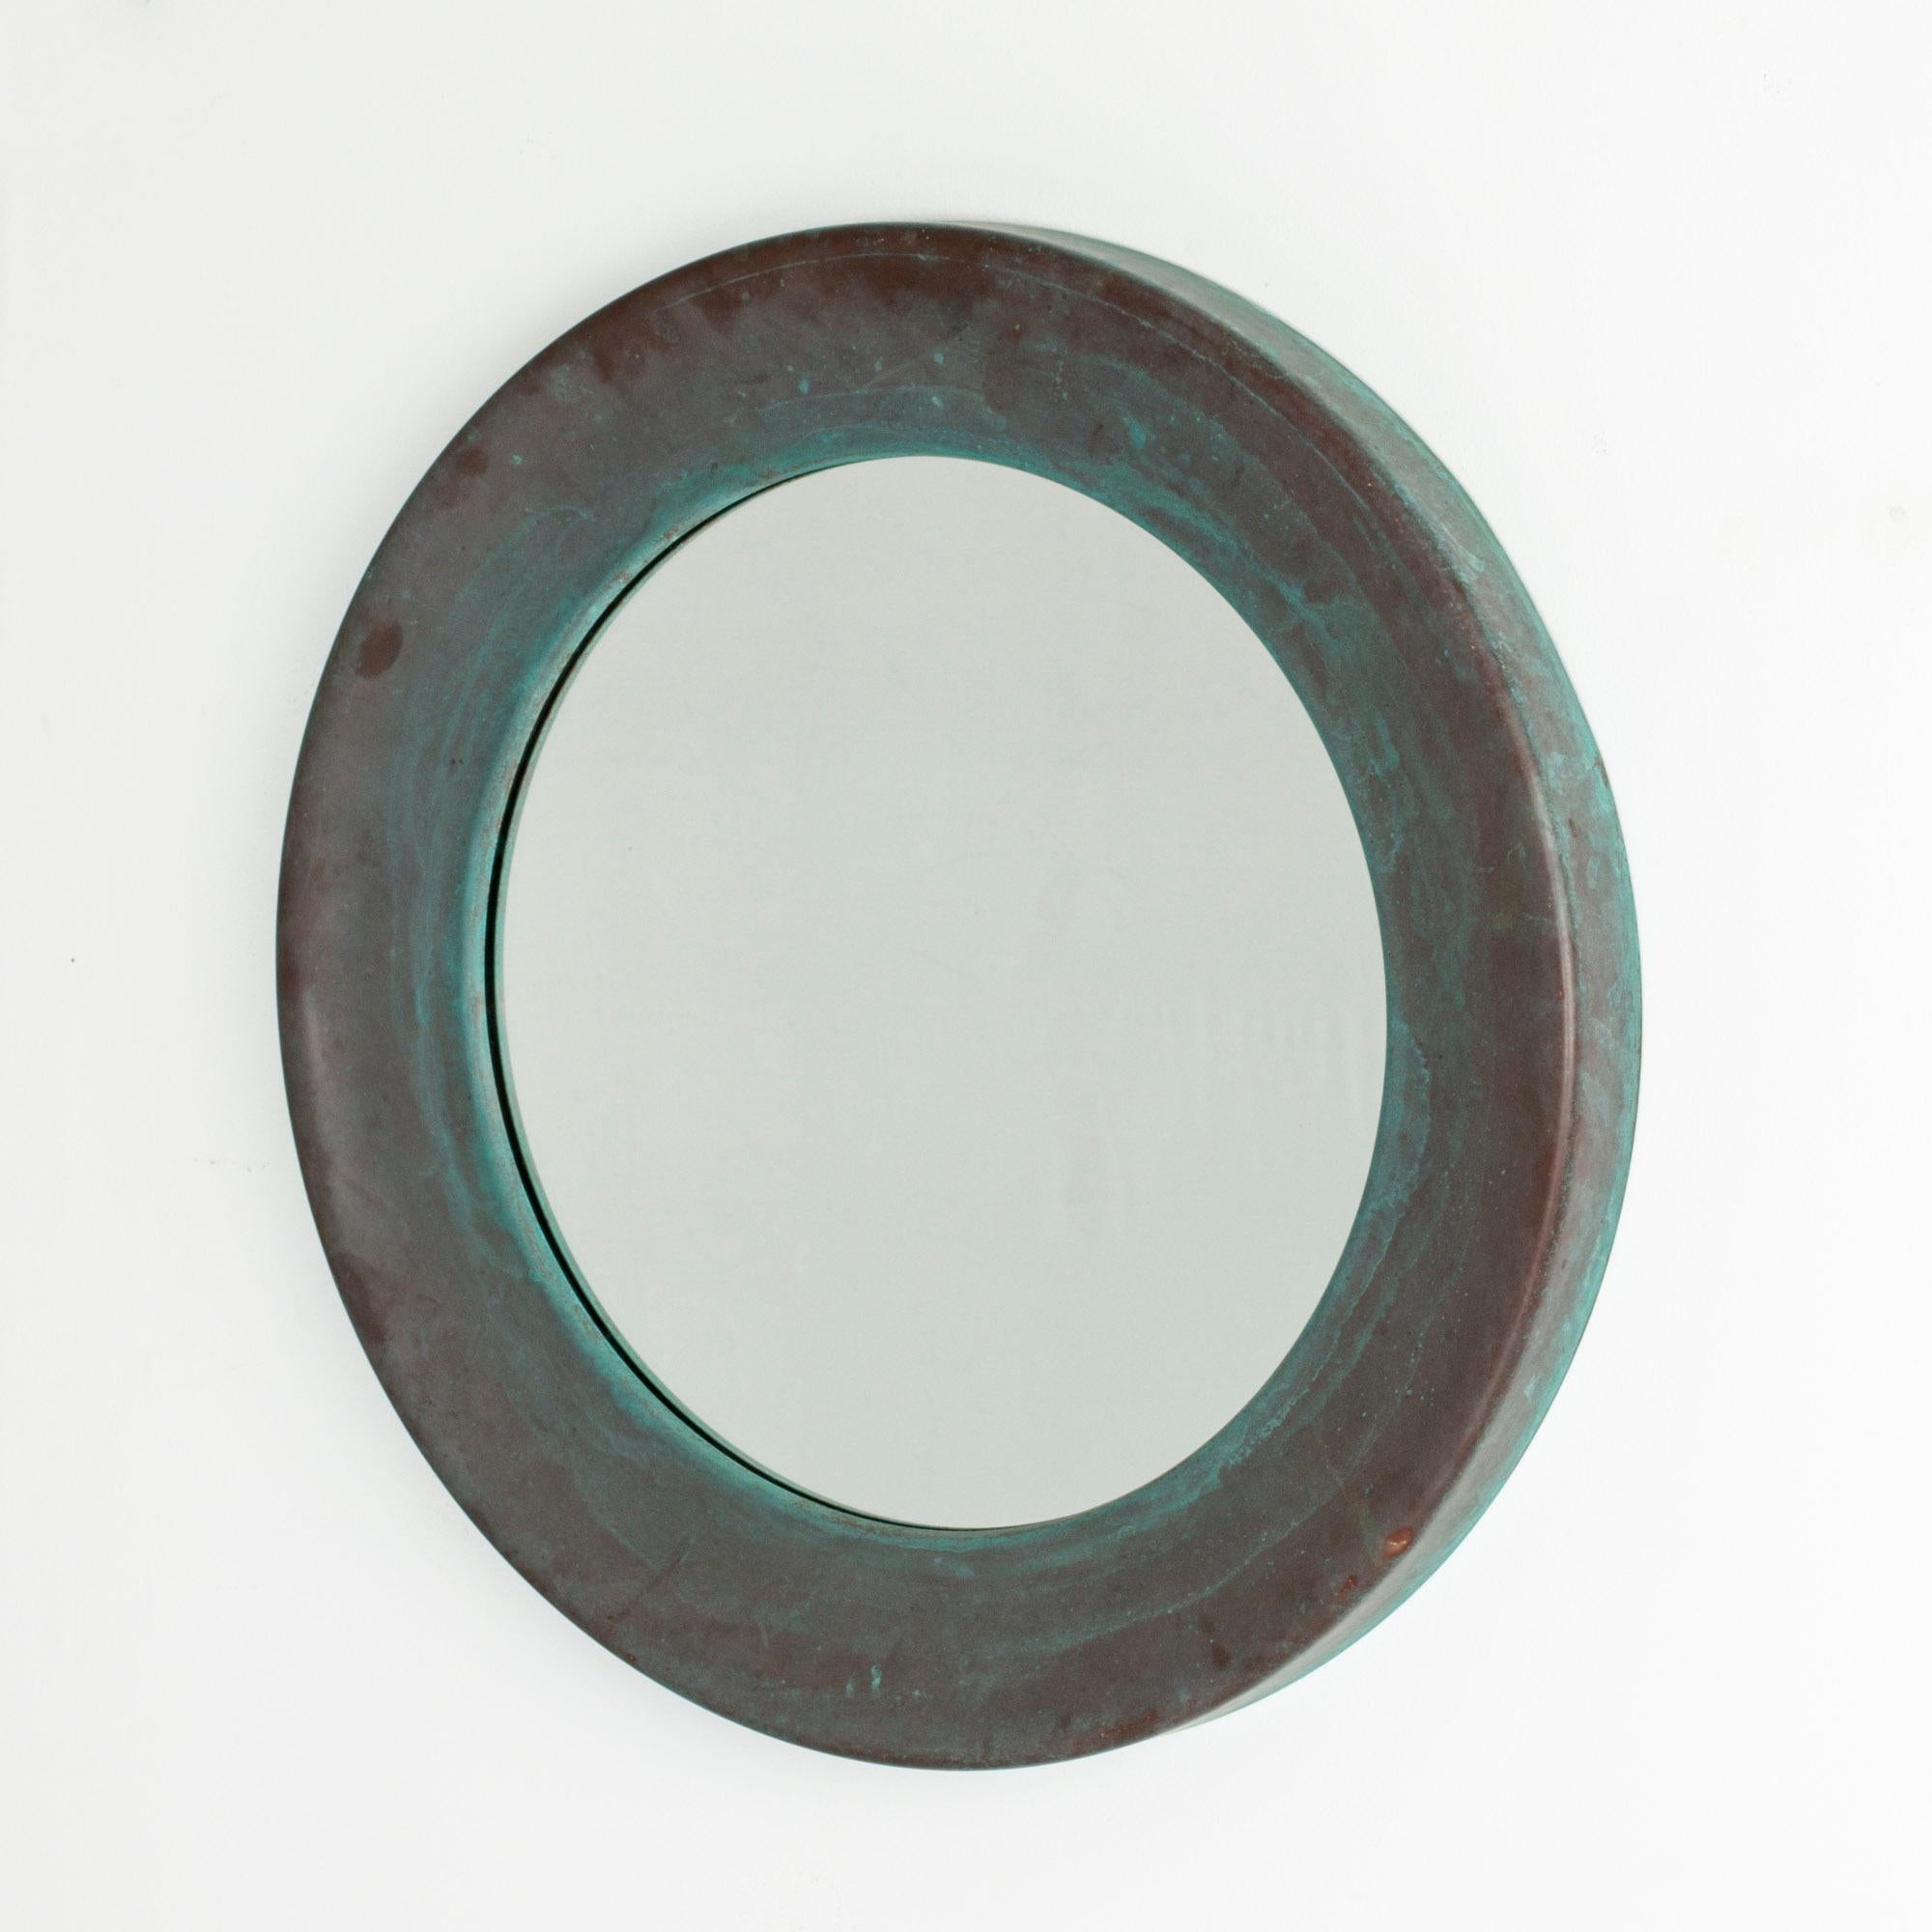 Large, round mirror from Glasmäster i Markaryd, made with a wide copper frame. Amazing green patina with hints of brown.